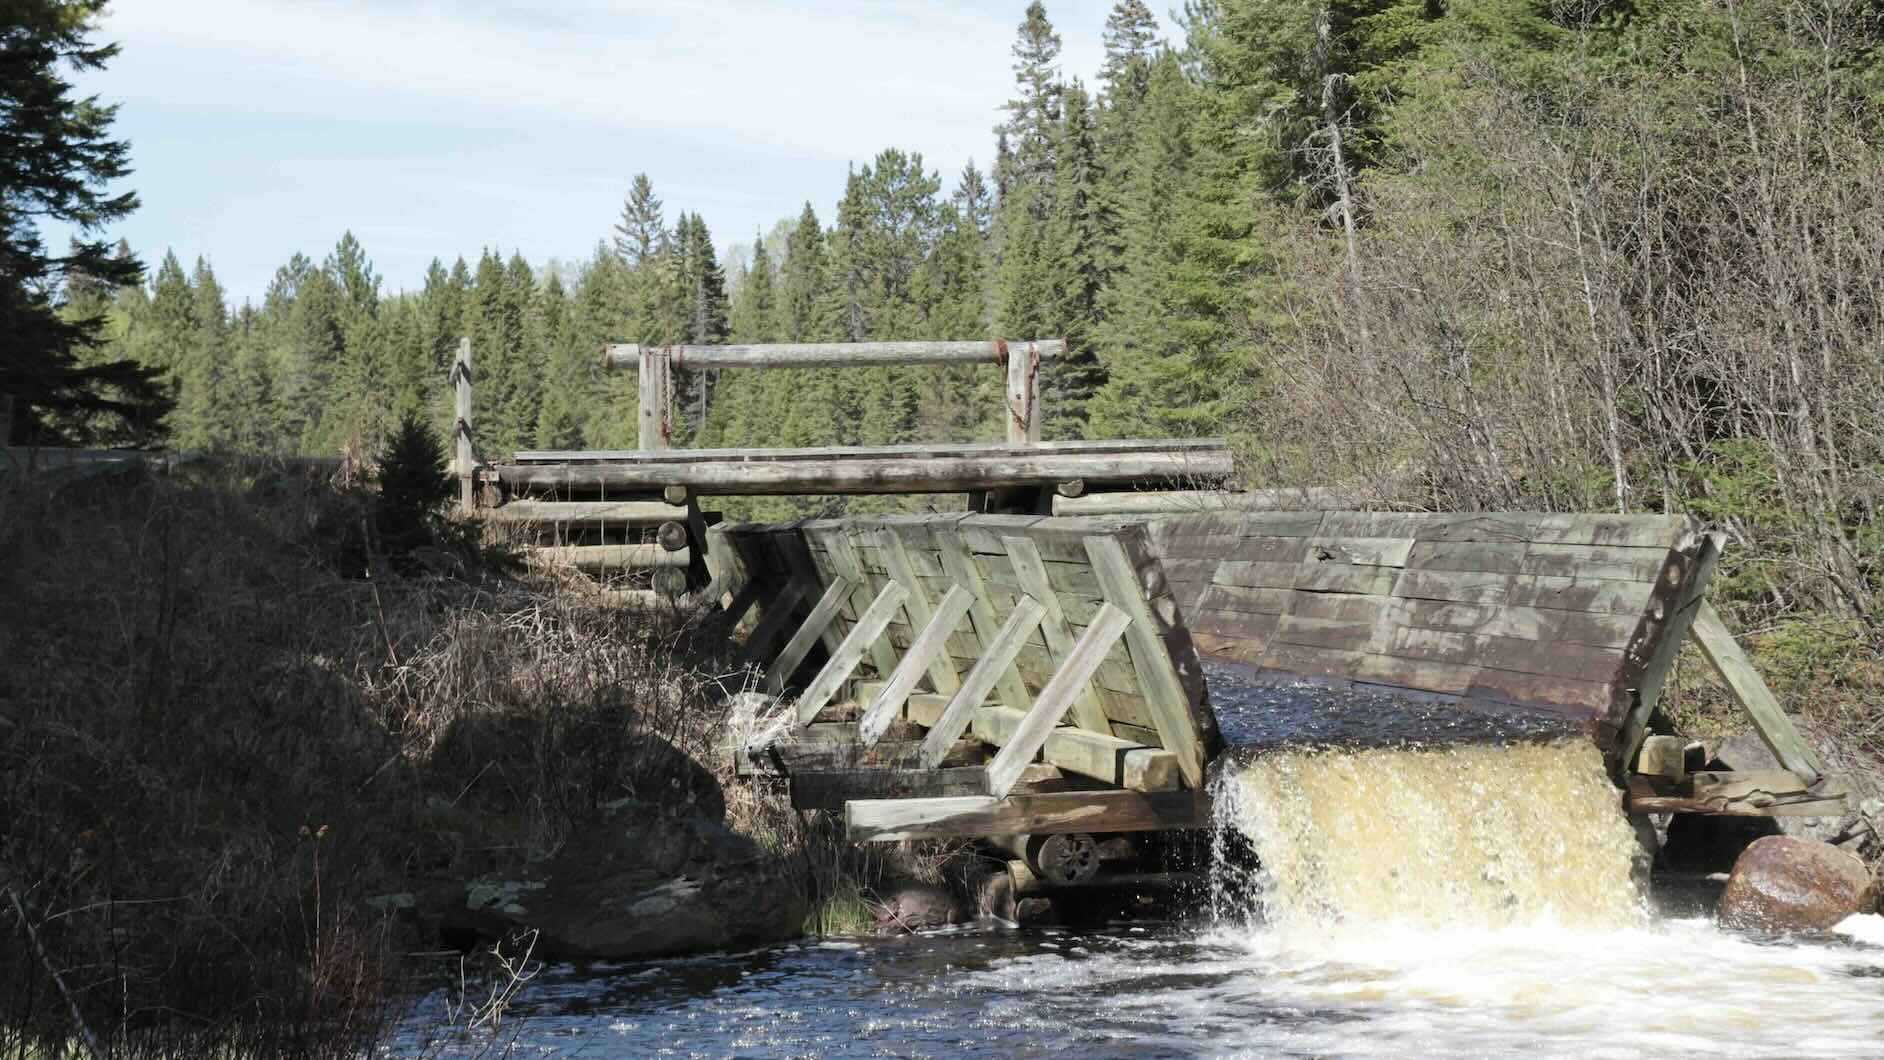 Algonquin Logging Museum Trail is one of the best things to do in Algonquin Park